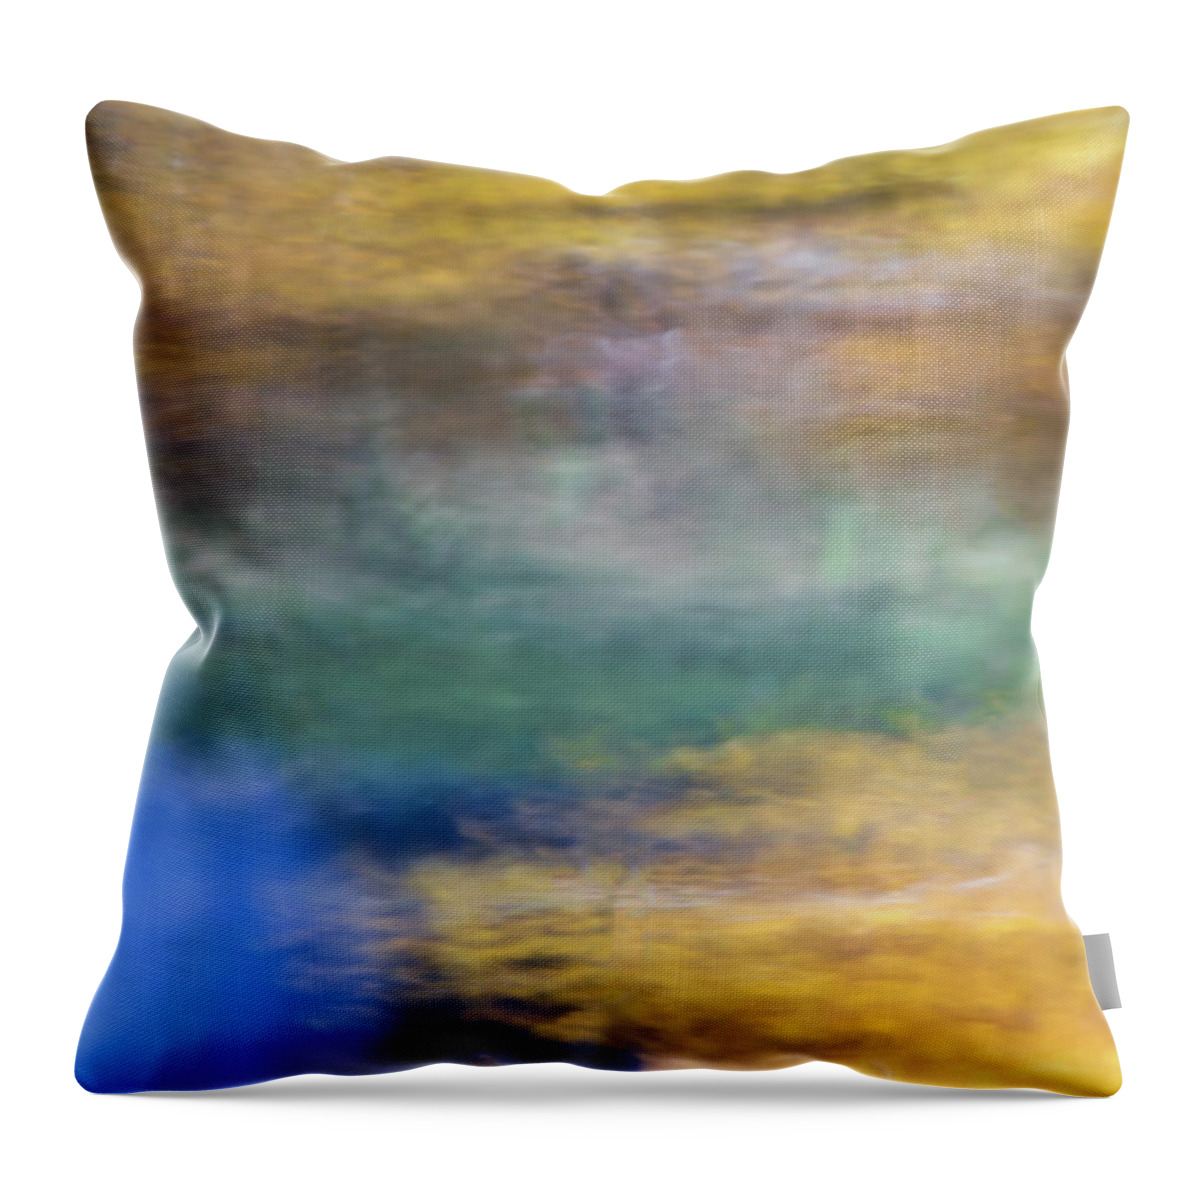 Yosemite Throw Pillow featuring the photograph Merced River Reflections 13 by Larry Marshall